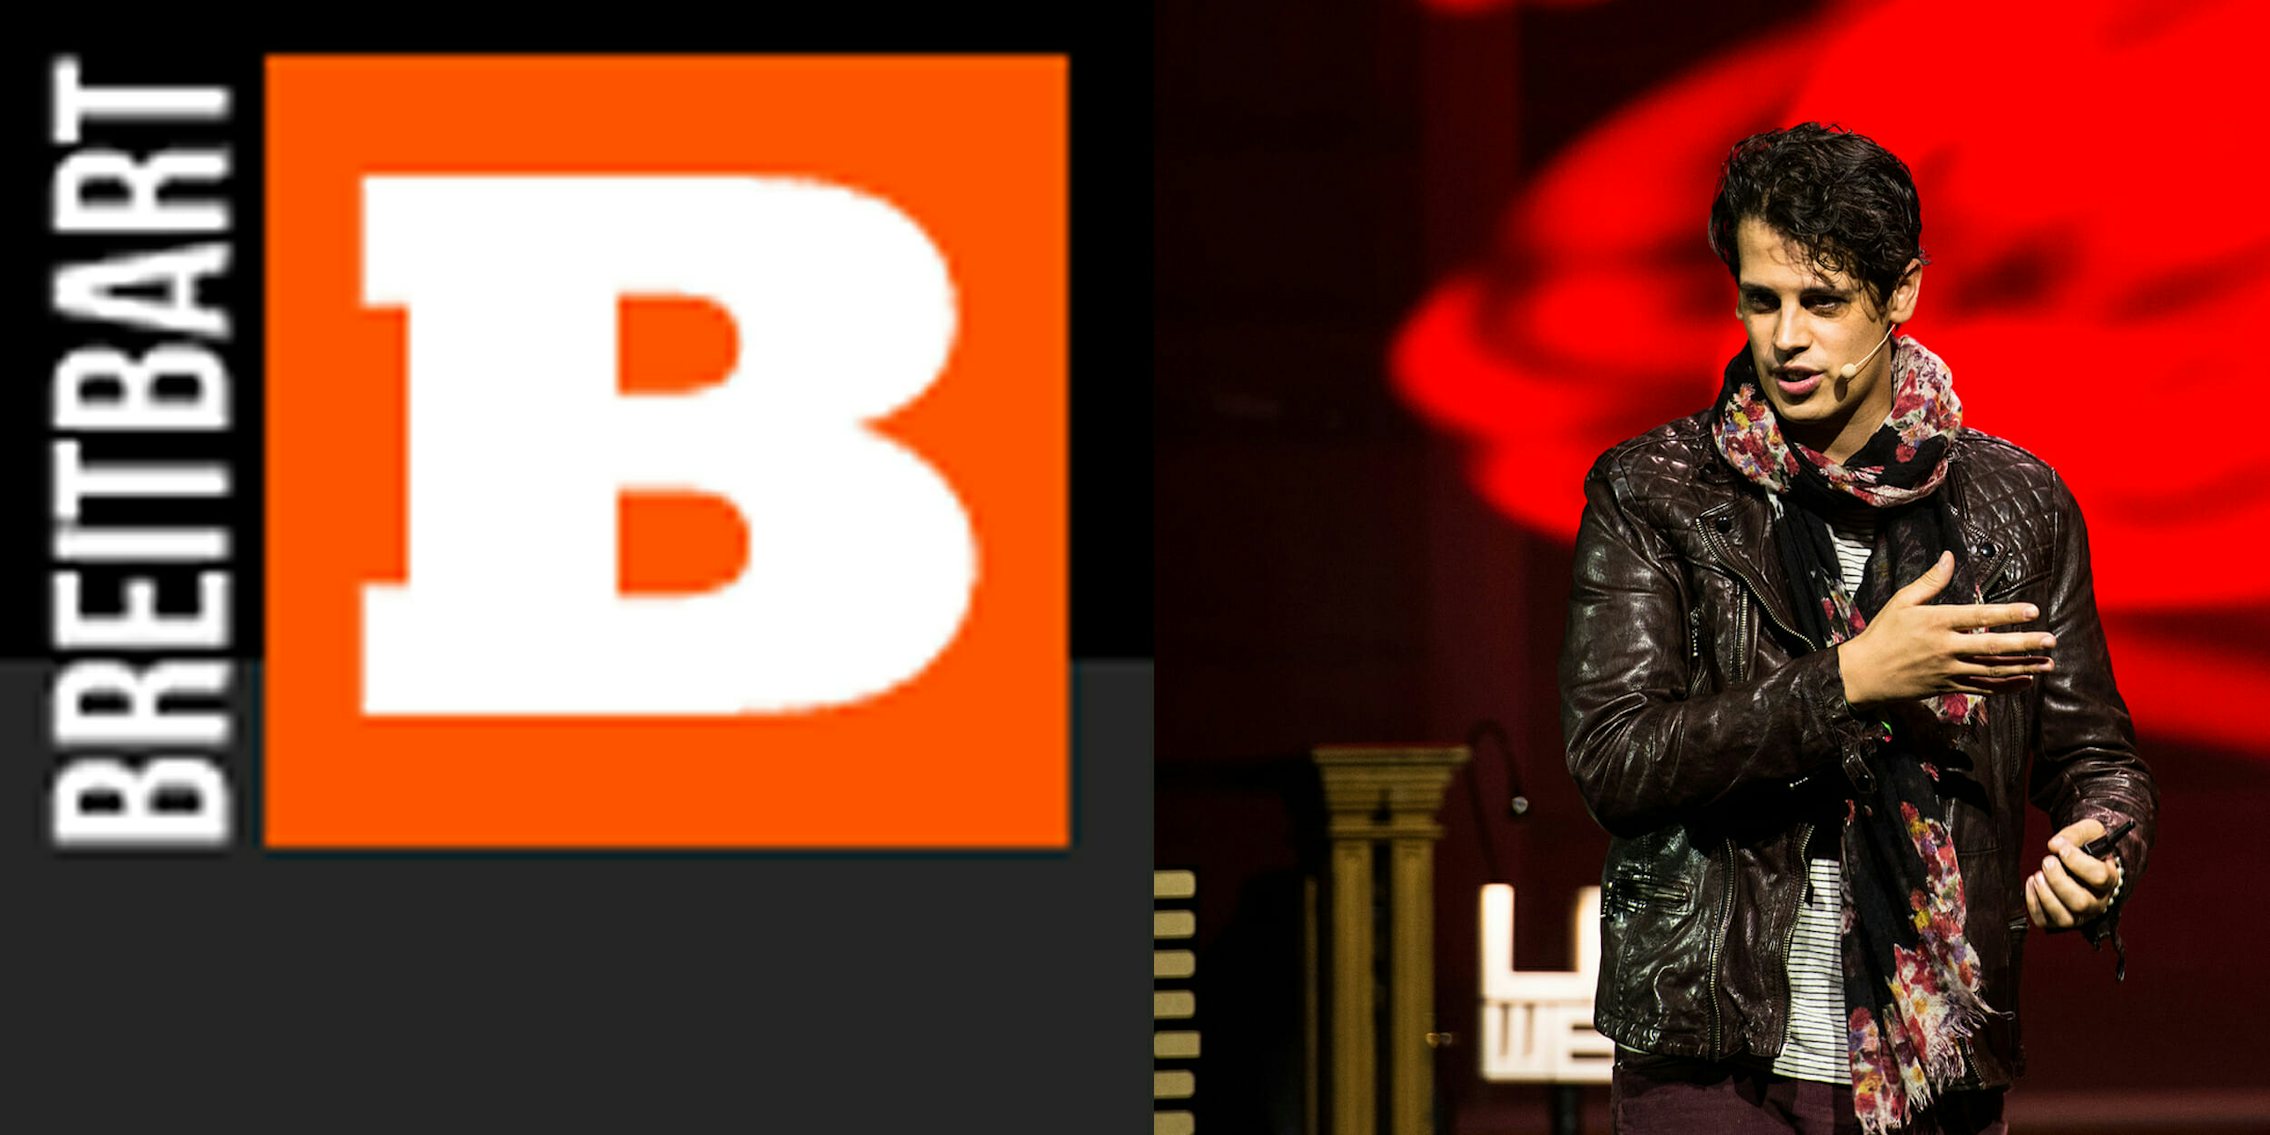 Breitbart News logo and Milo Yiannopoulos